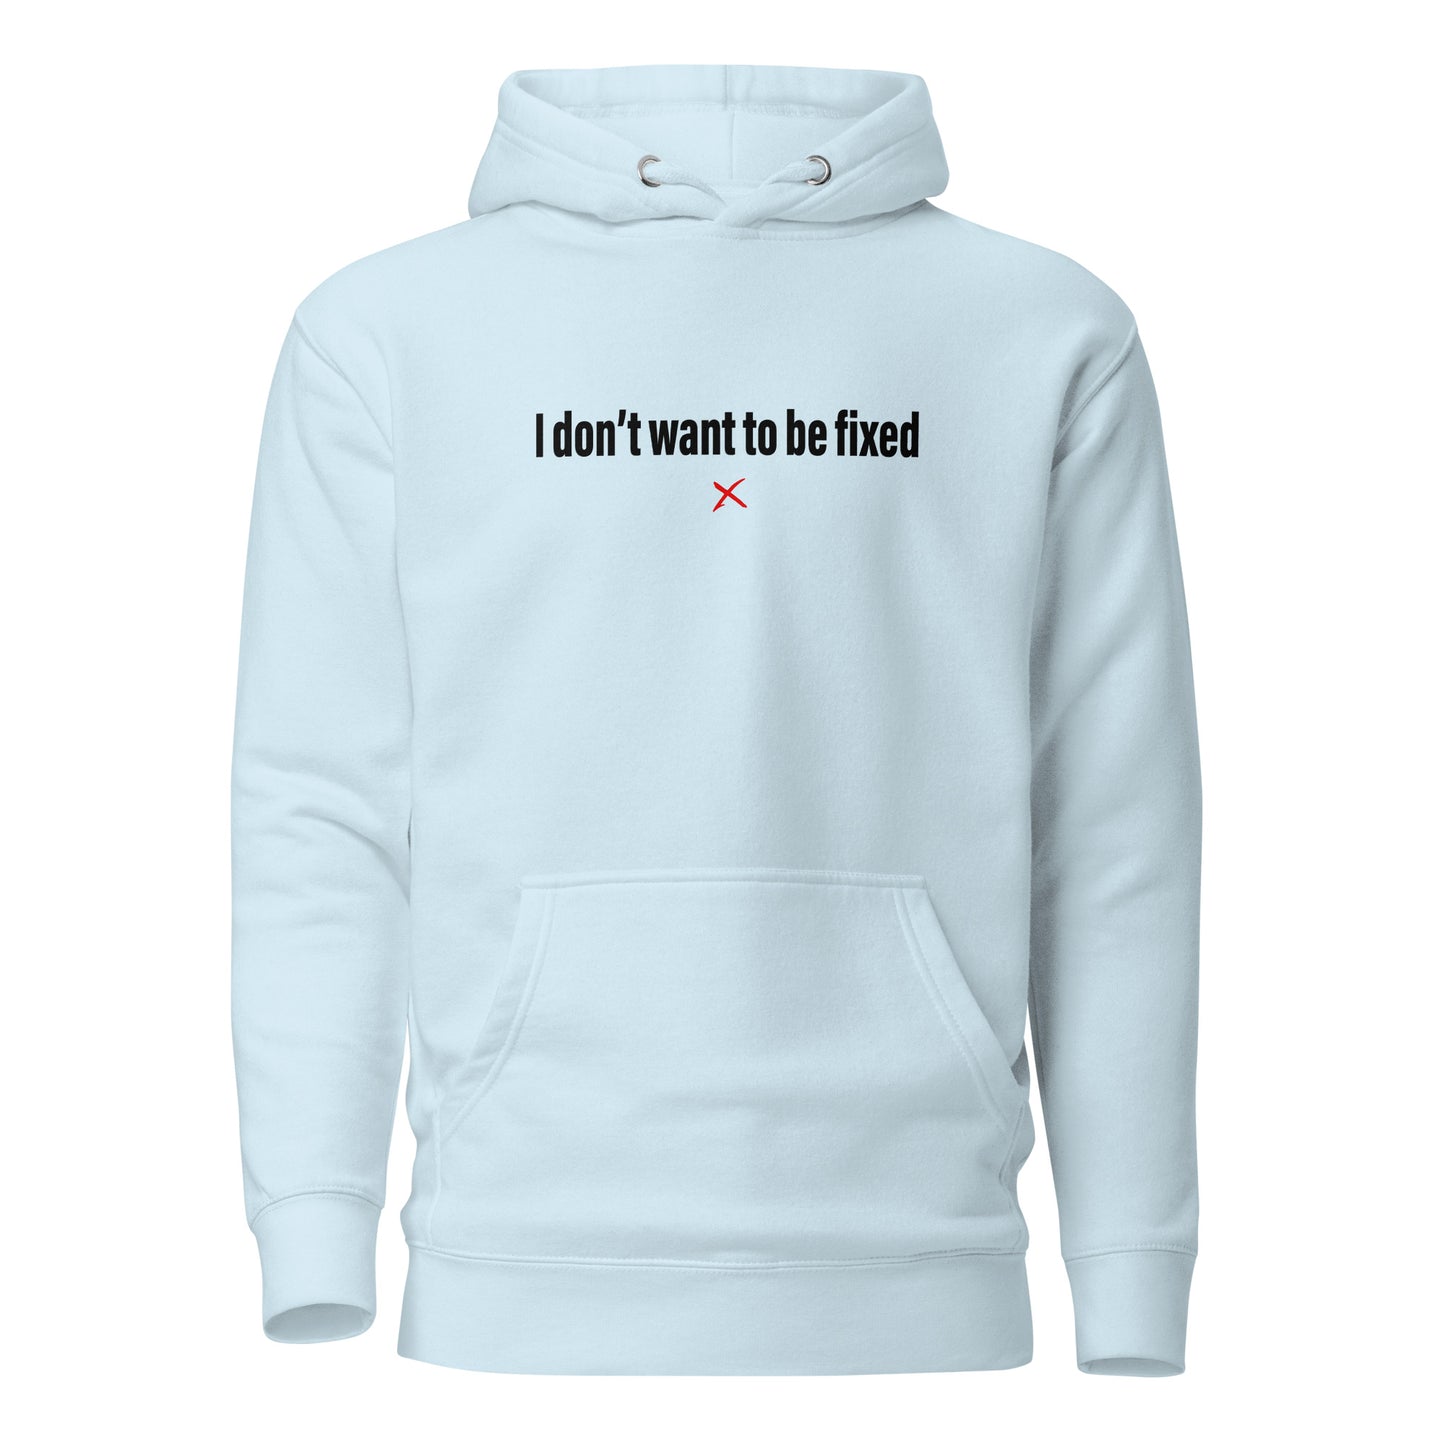 I don't want to be fixed - Hoodie